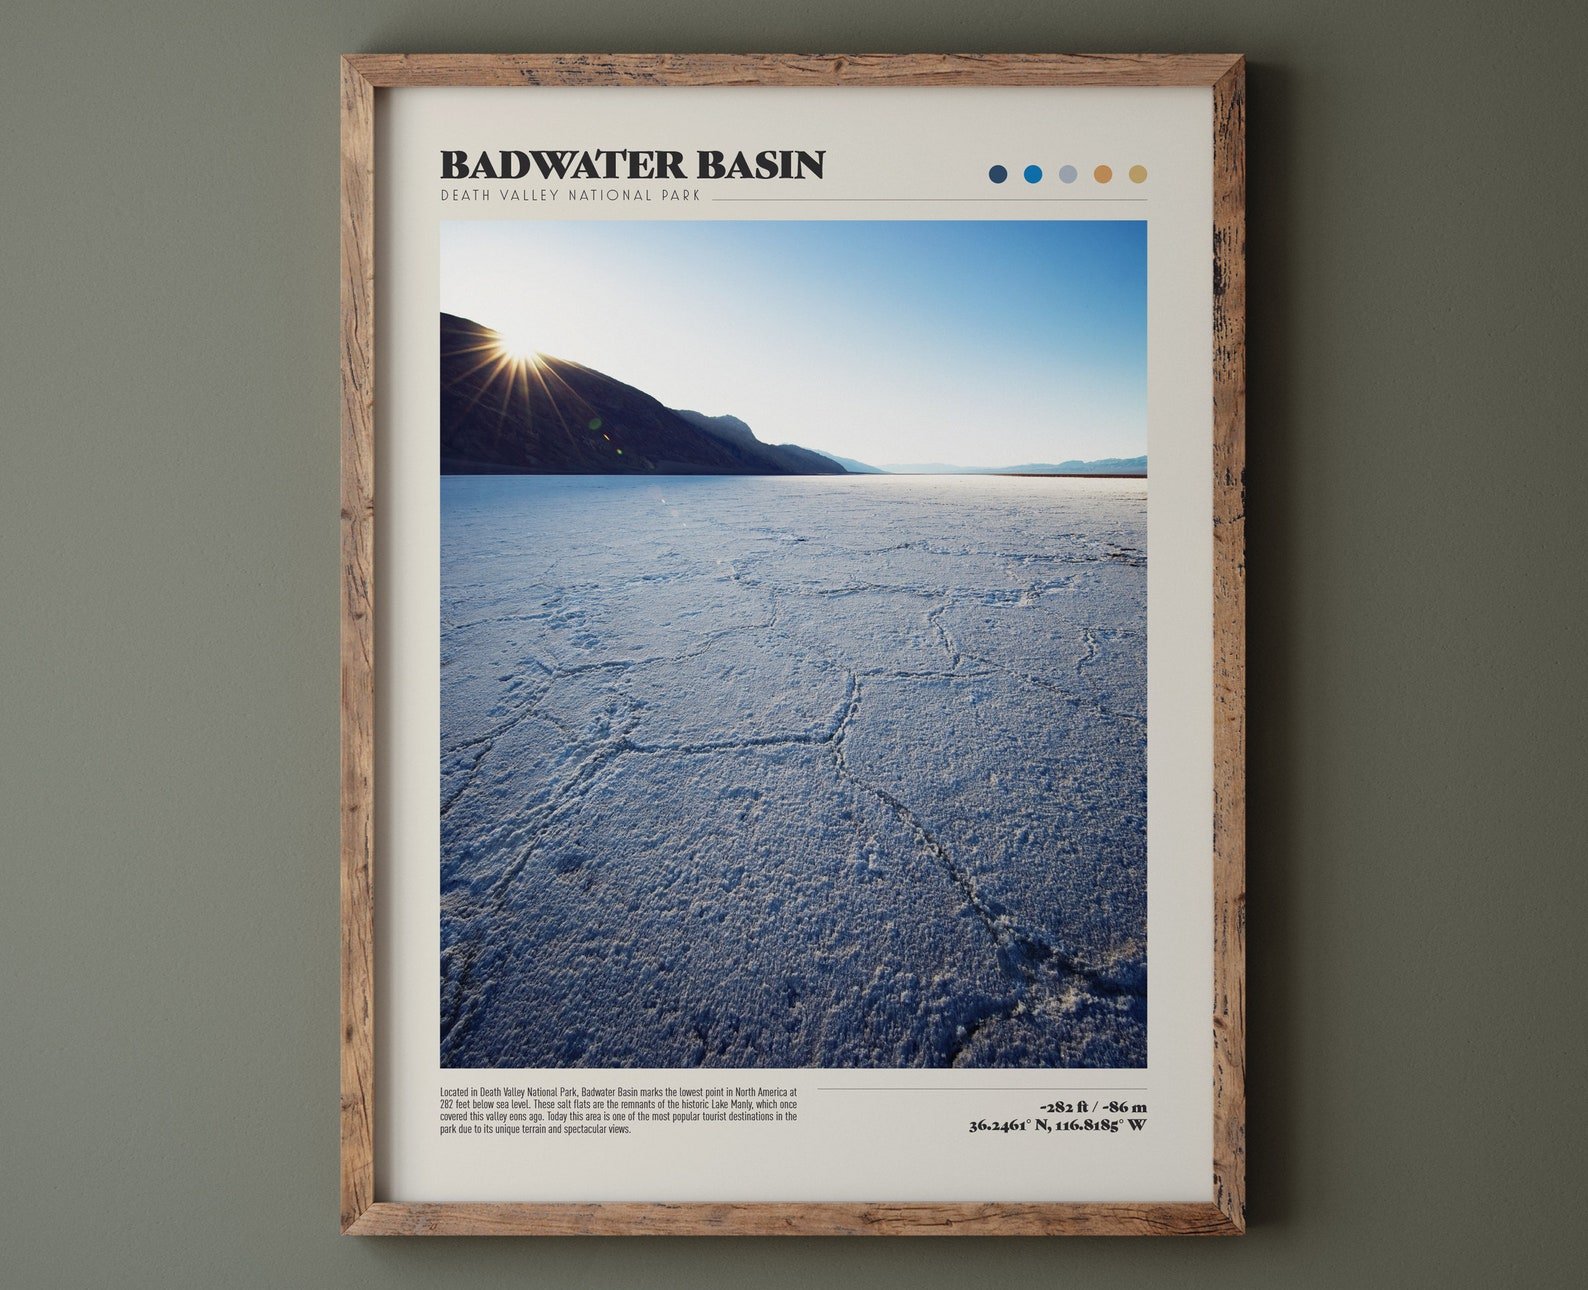 death-valley-badwater-basin-poster.jpg